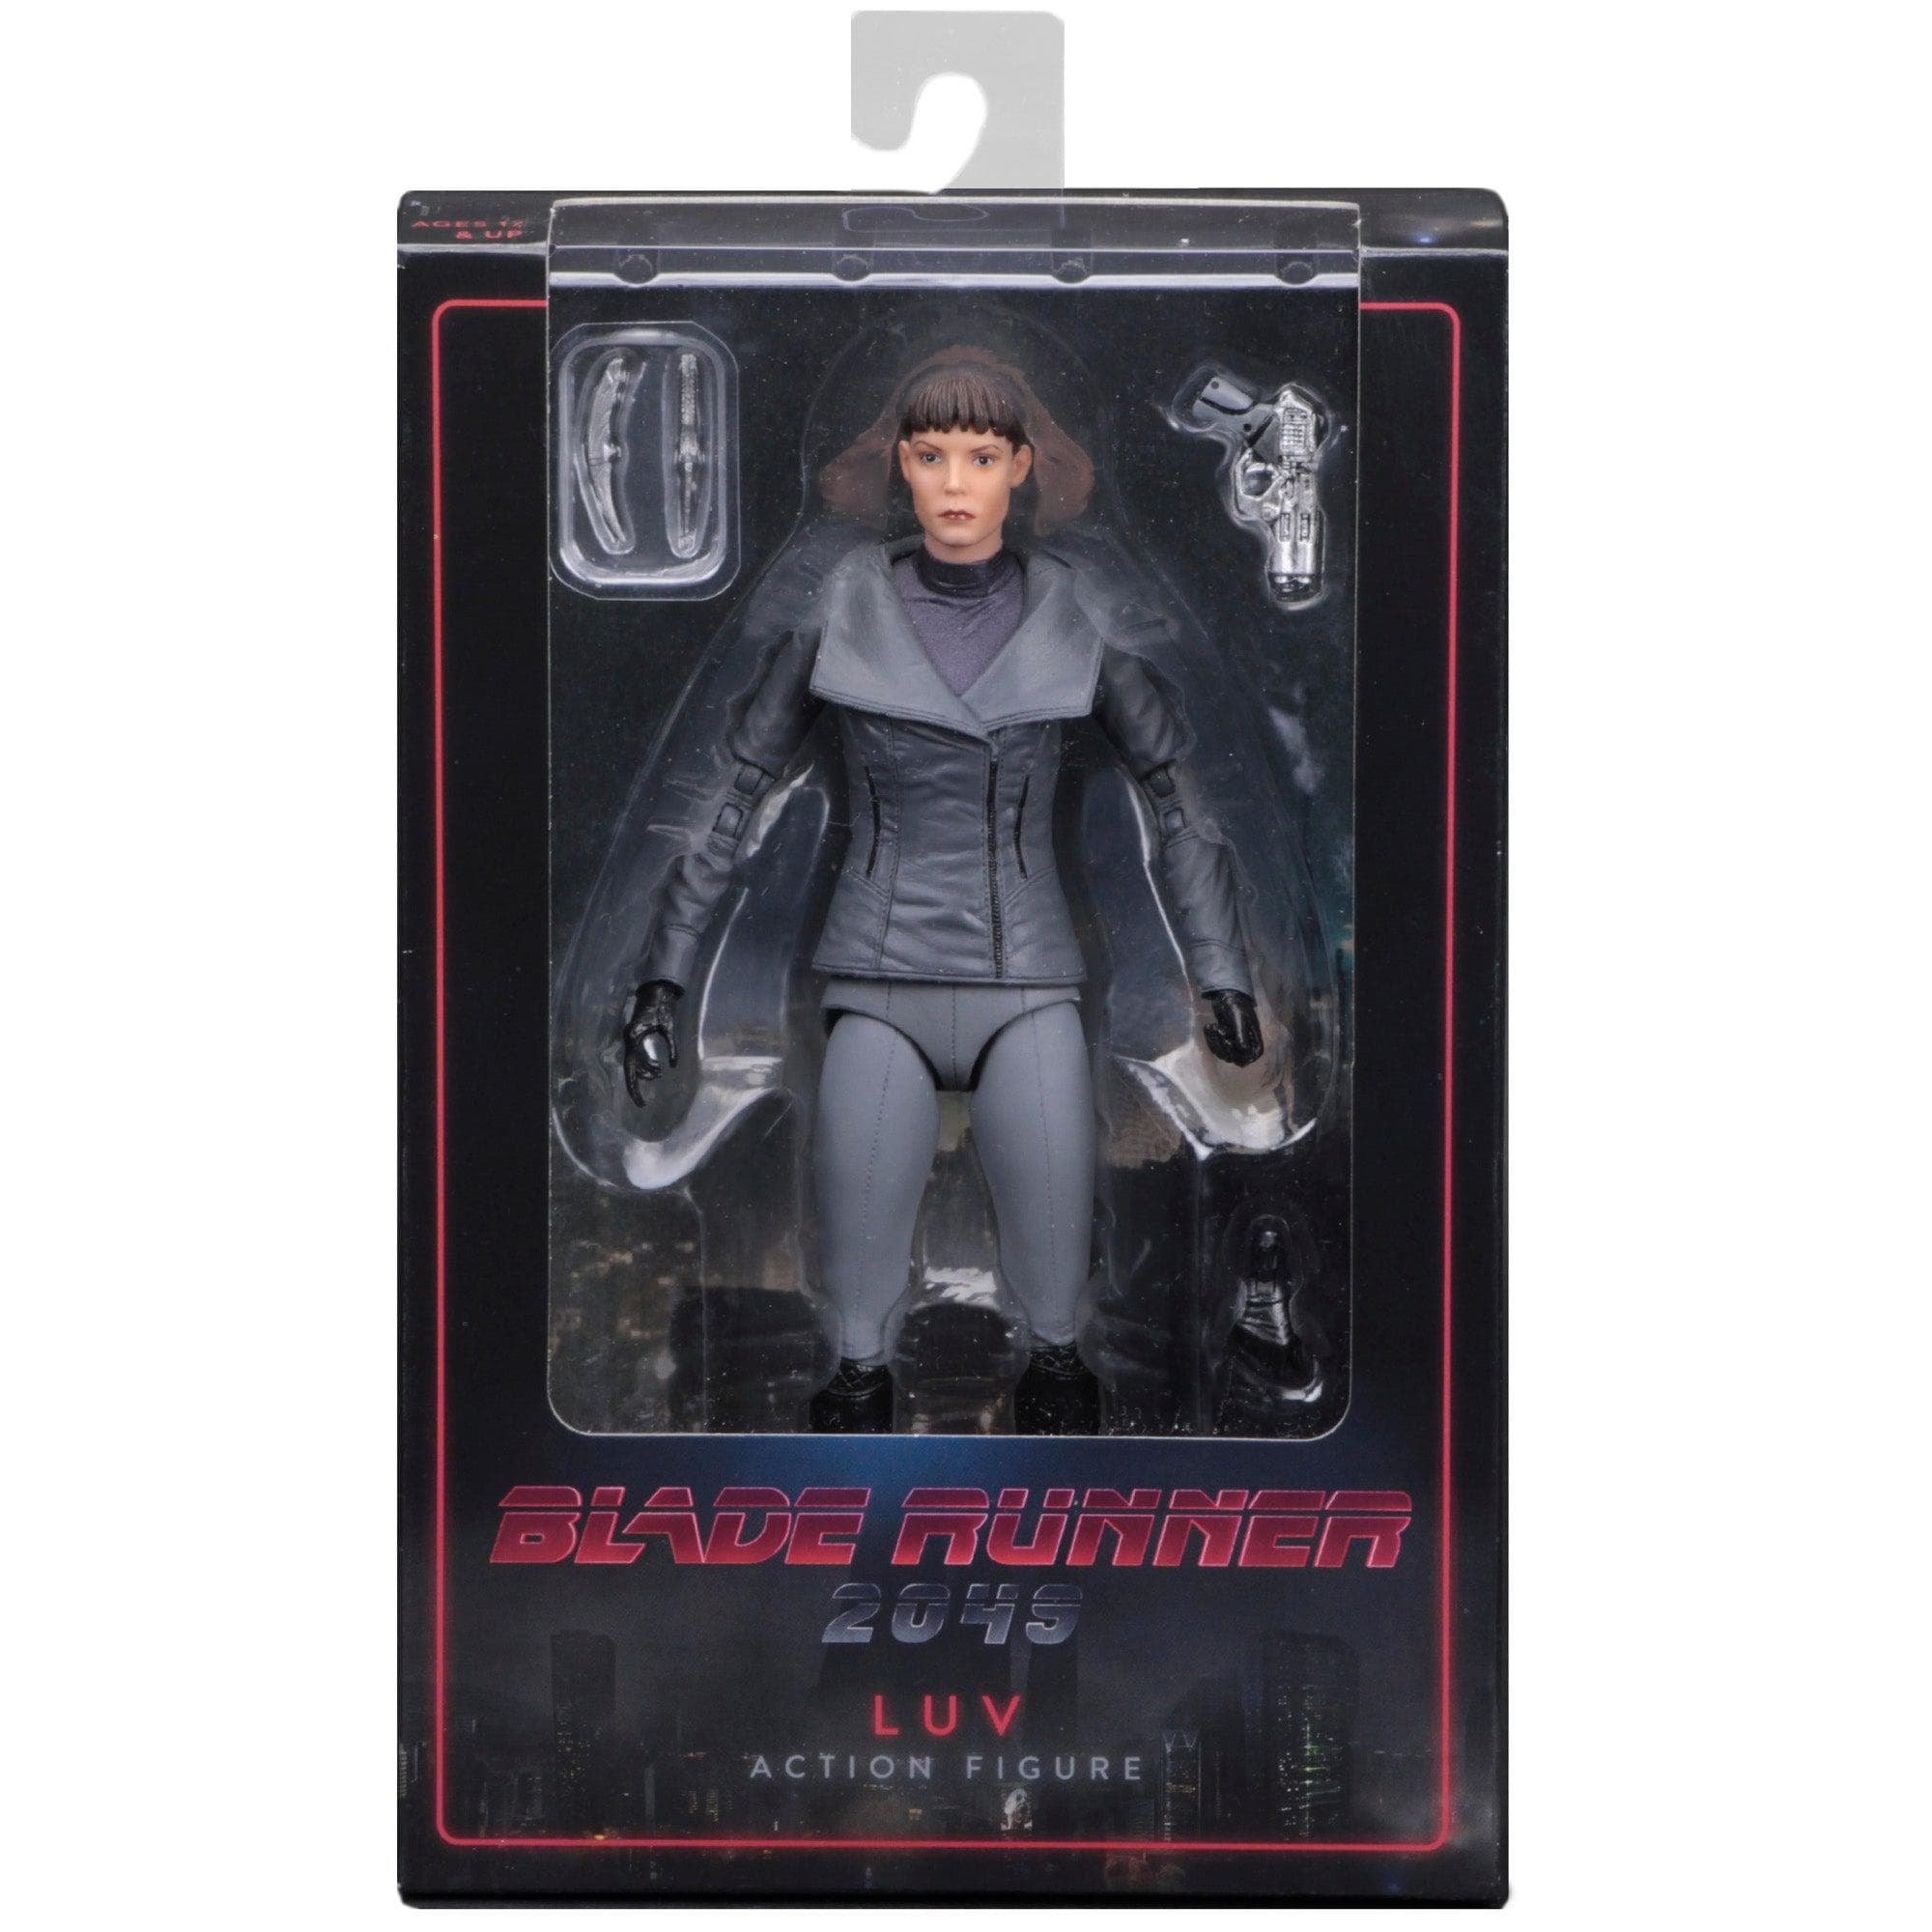 NECA - Blade Runner 2049 - 7" Scale Action Figure - Series 2 Luv - costumes.com